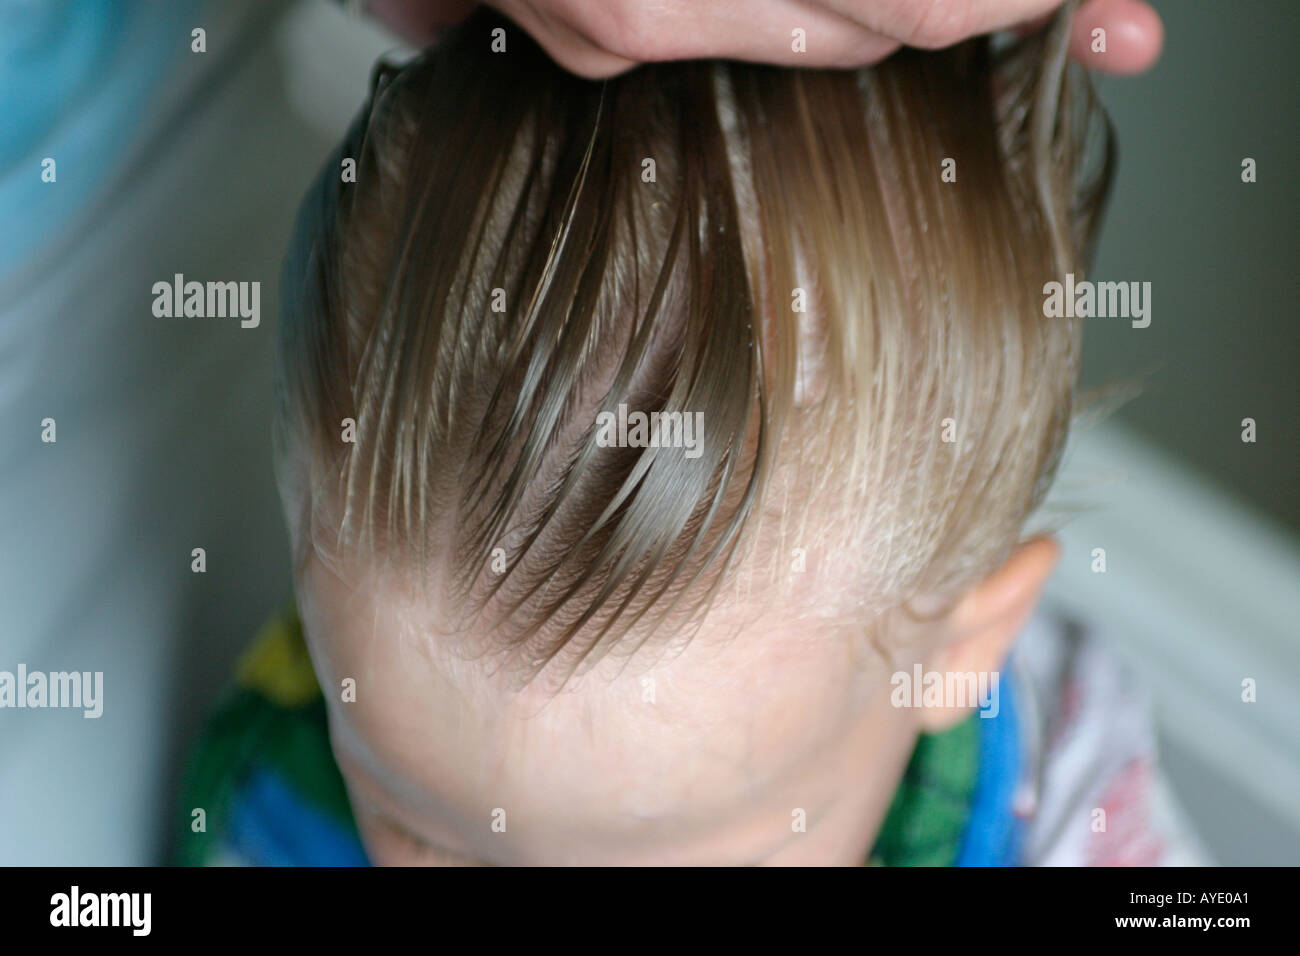 Four Year Old Boy Has His Hair Combed For Lice By His Mother Stock